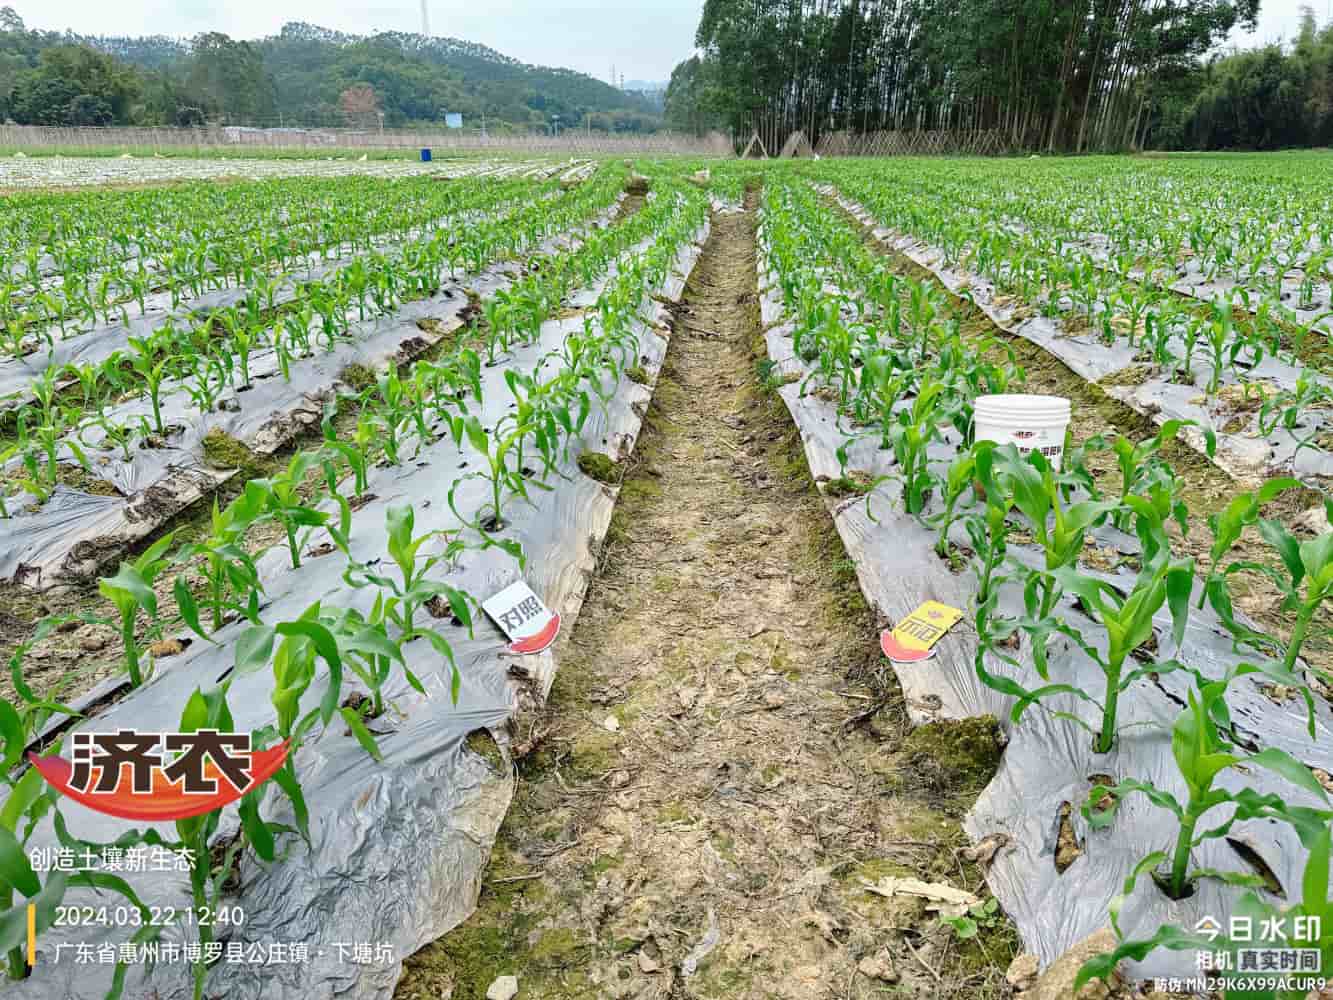 The effect of using agricultural products in Guangdong corn(图1)